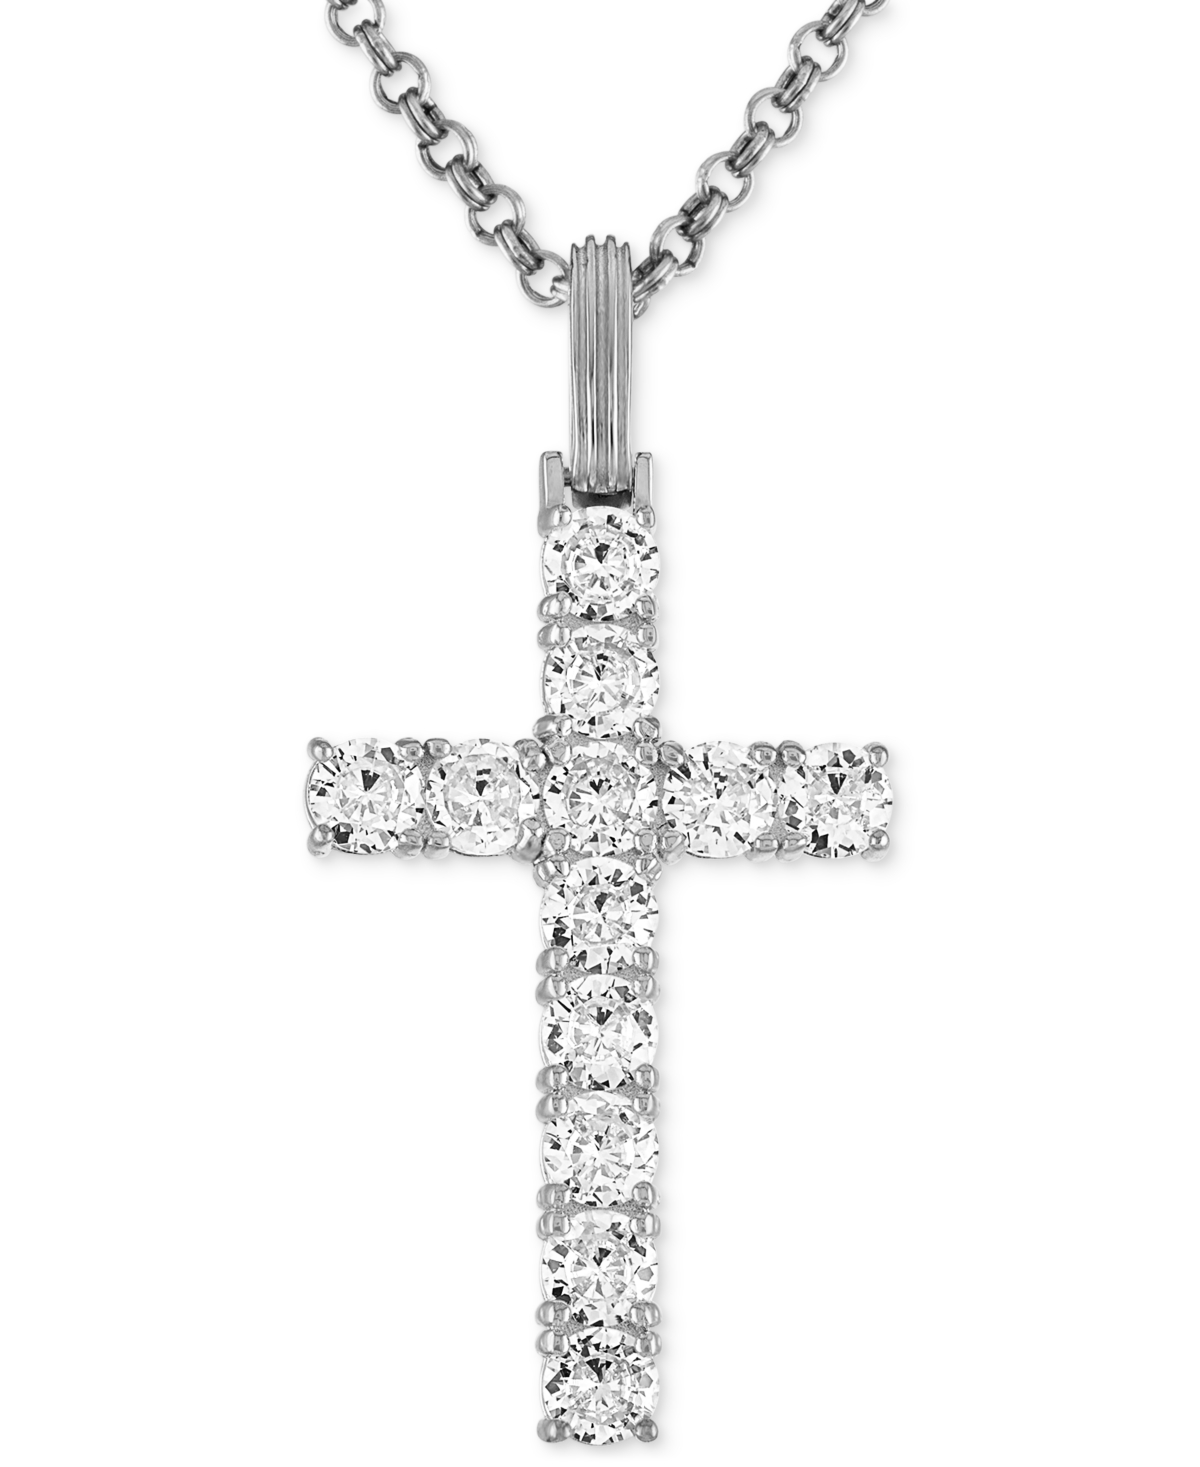 Black Cubic Zirconia Cross Pendant in Black Ruthenium-Plated Sterling Silver (Also in White Cubic Zirconia), Created for Macy's